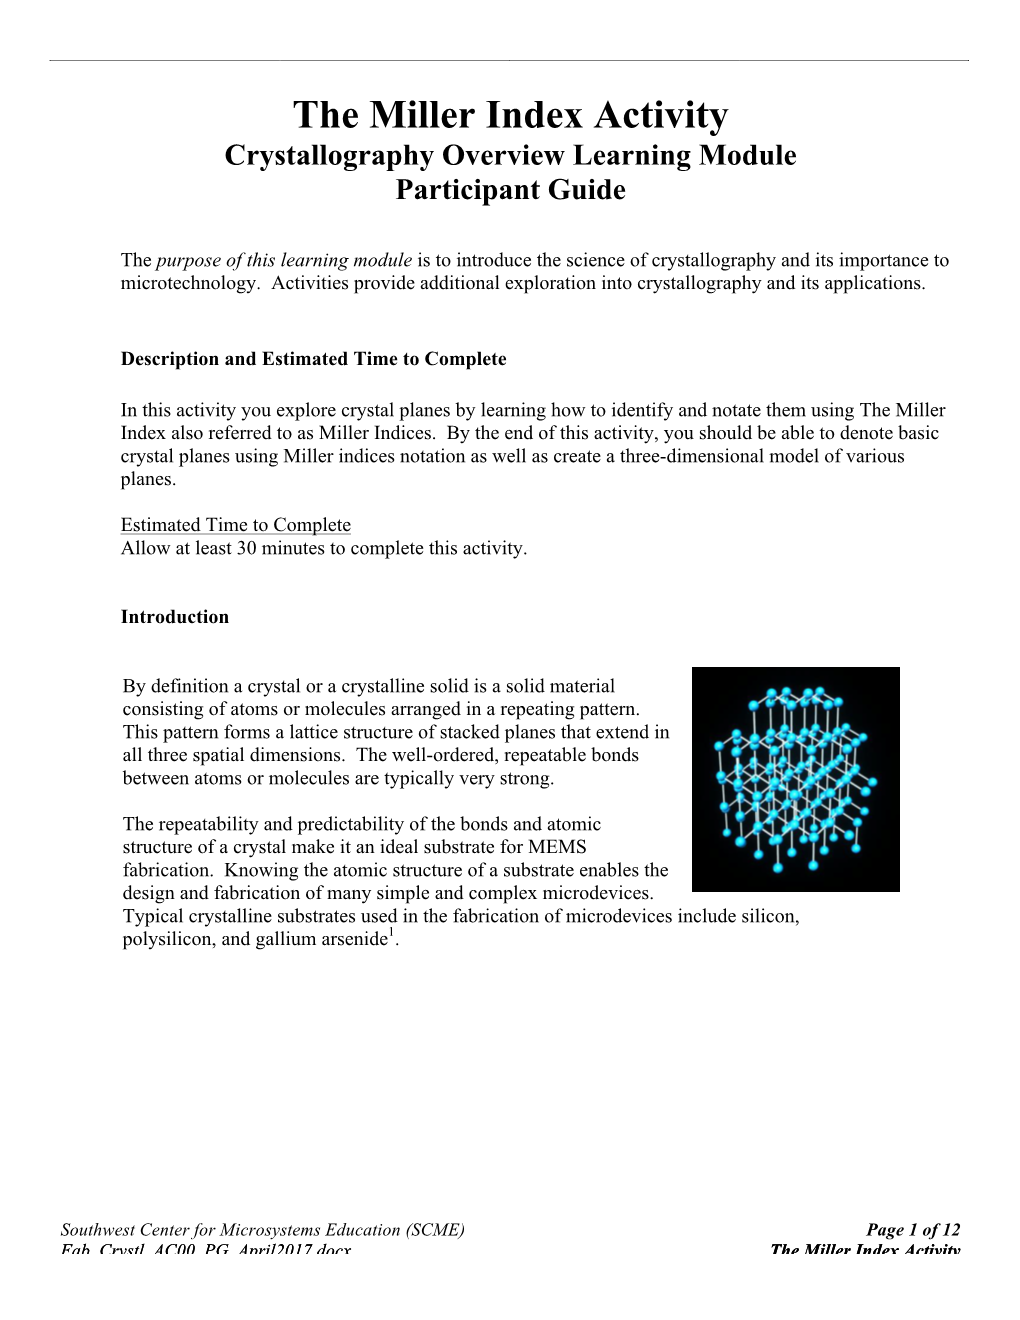 The Miller Index Activity Crystallography Overview Learning Module Participant Guide